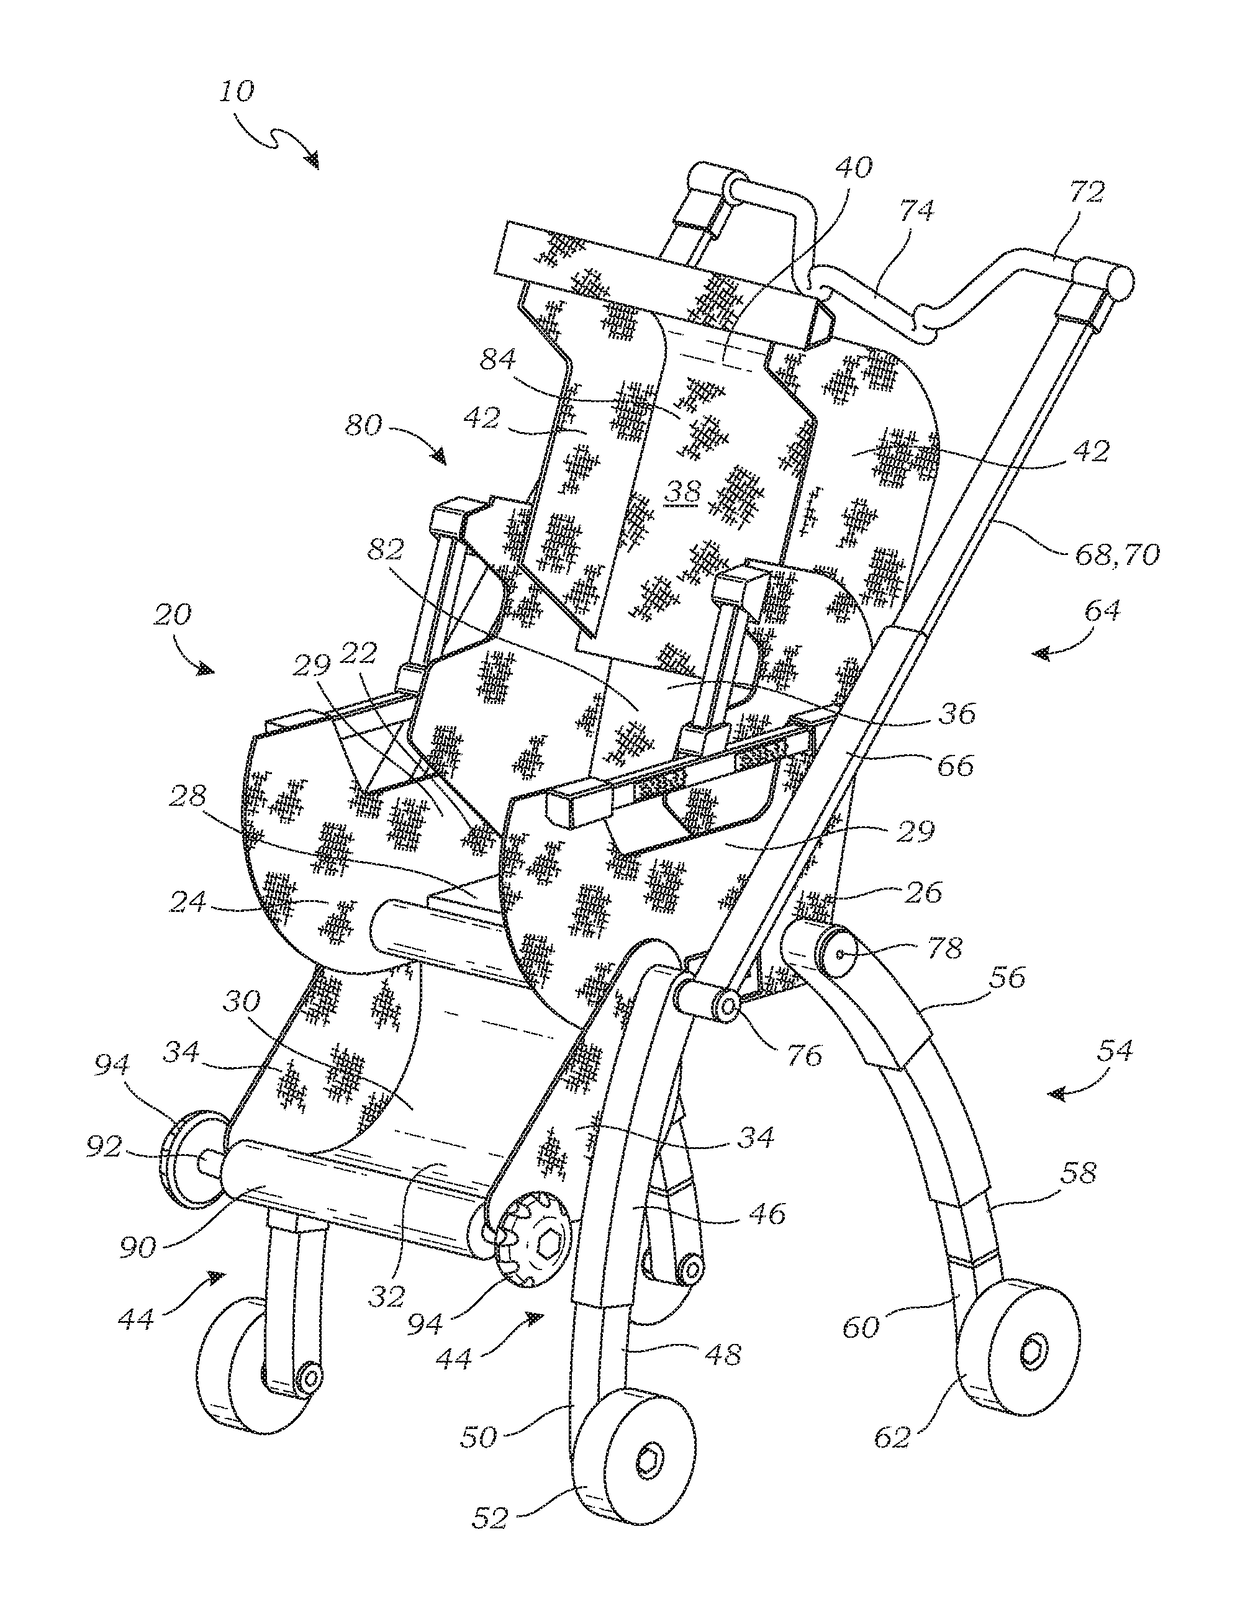 Baby carrier device